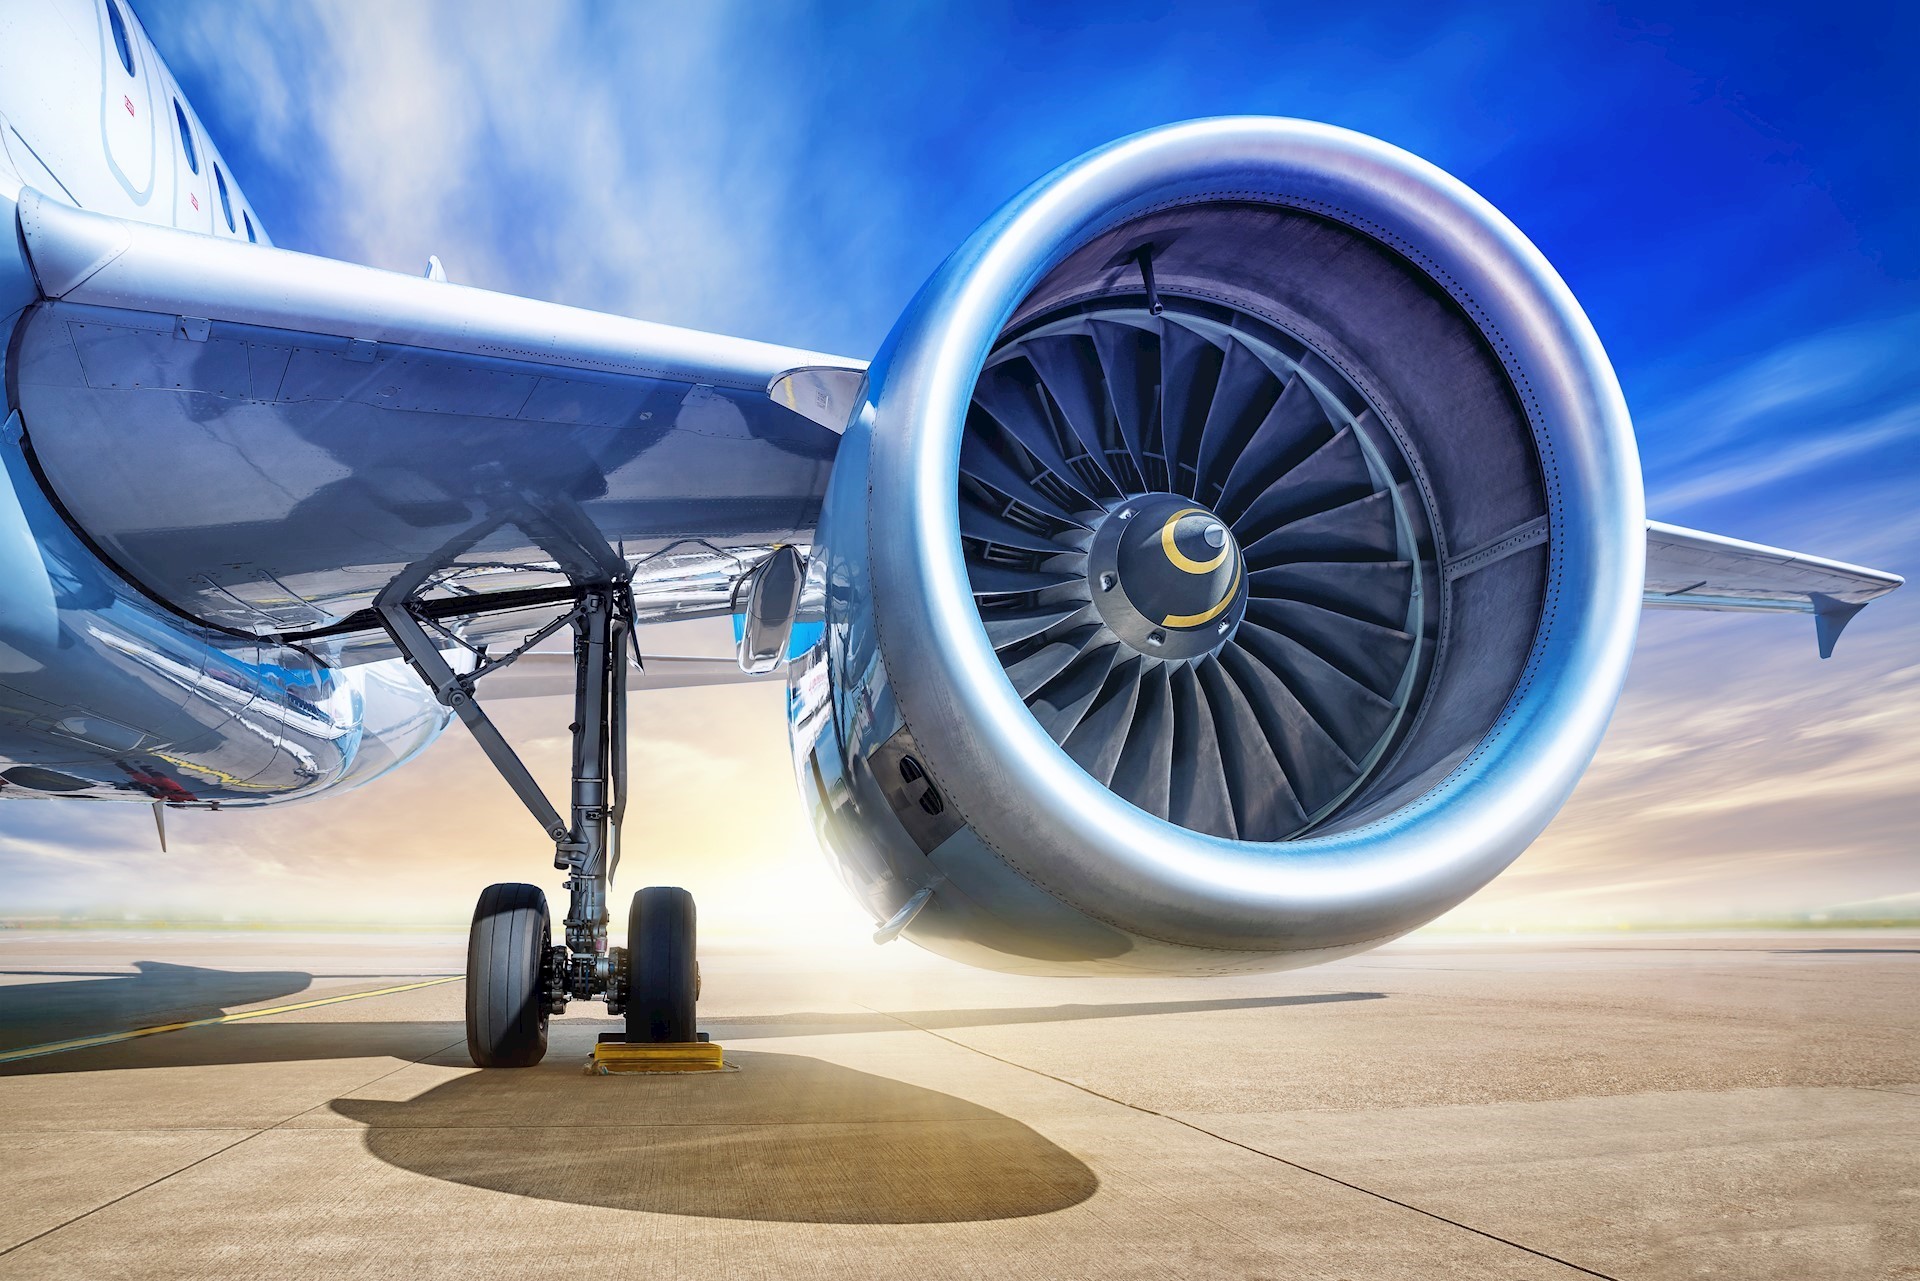 Maraging steel with 18% nickel content possesses the impact-fatigue strength required for aircraft landing gear